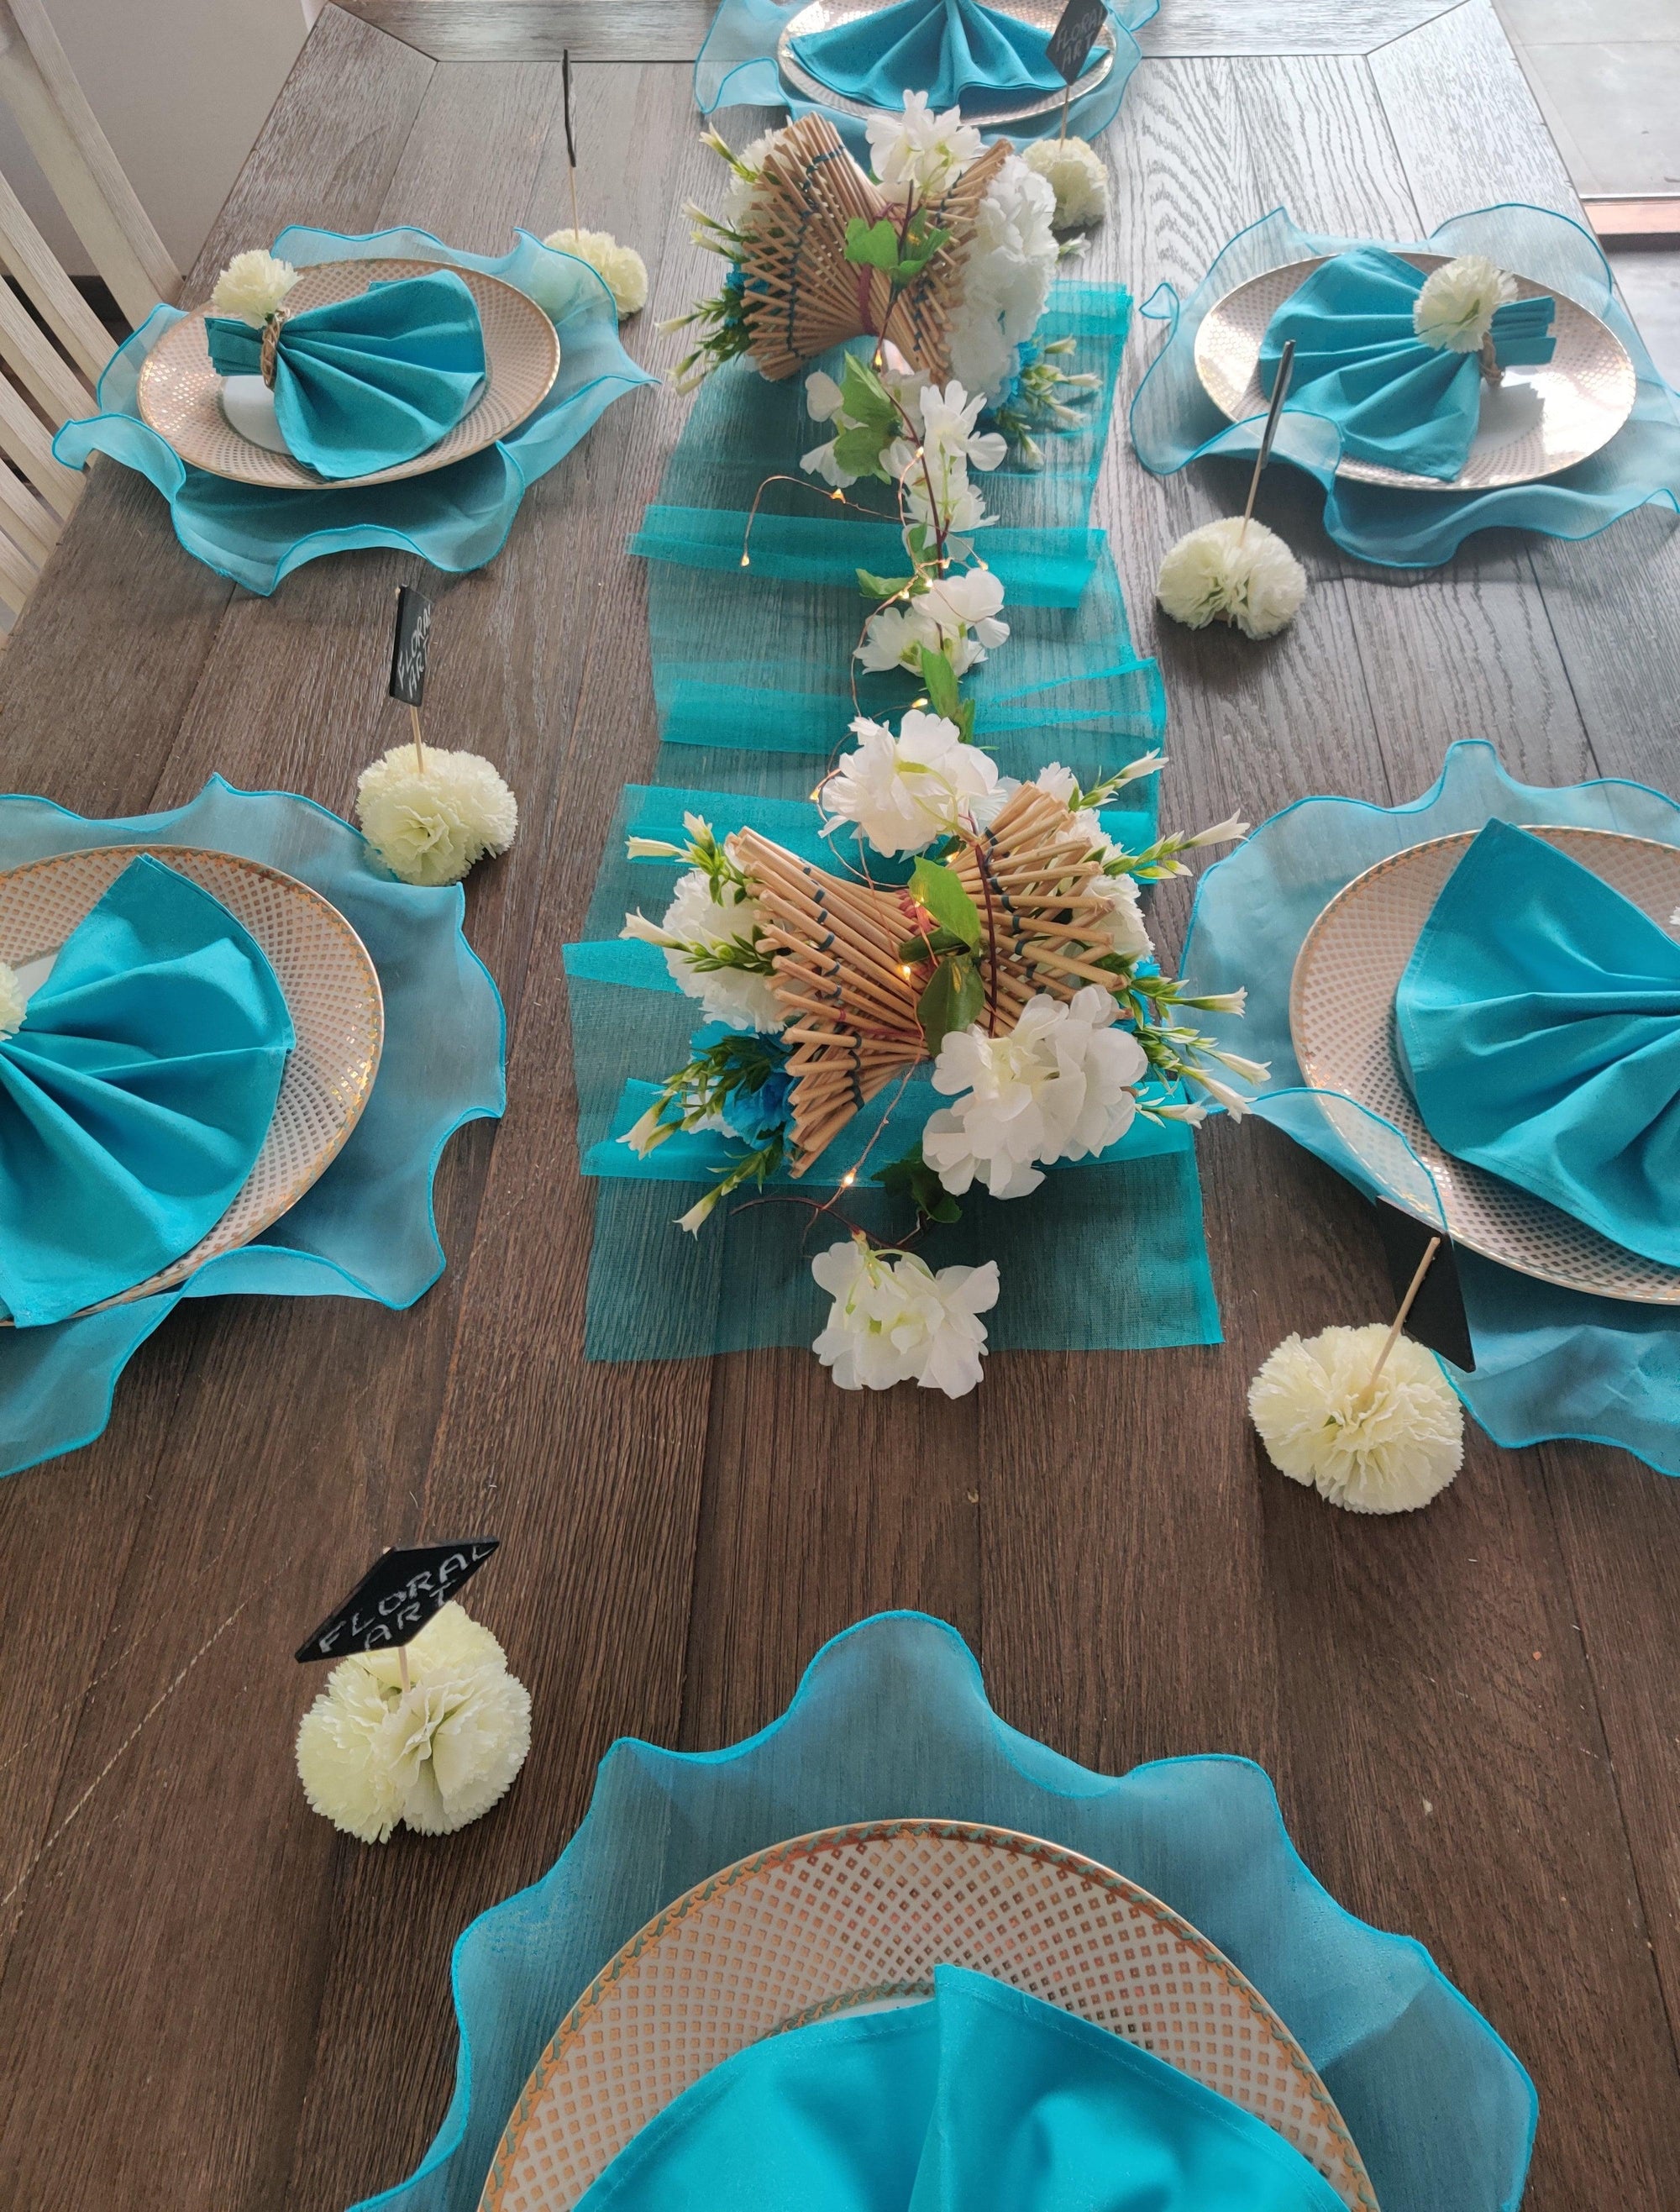 Amscan Summer Sea Table Decorating Kit at best price in Gurgaon